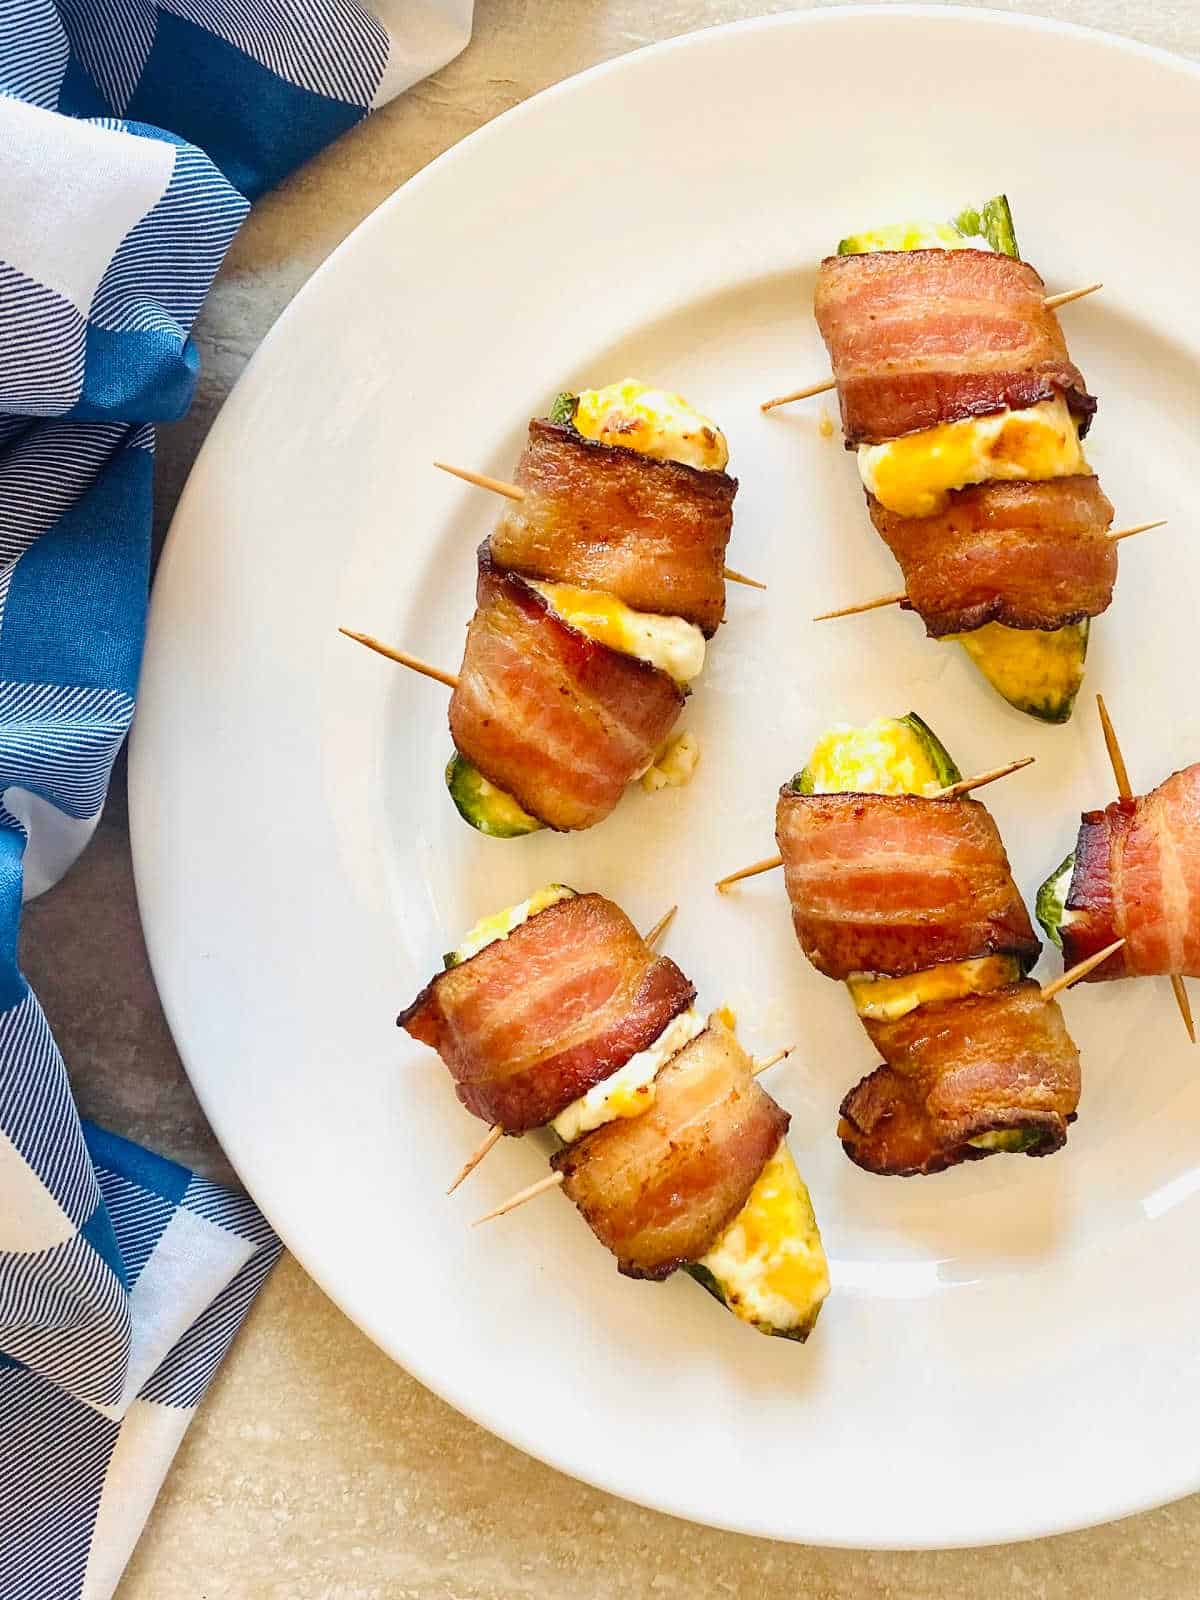 air fryer bacon wrapped stuffed jalapeno peppers on a plate next to a blue napkin